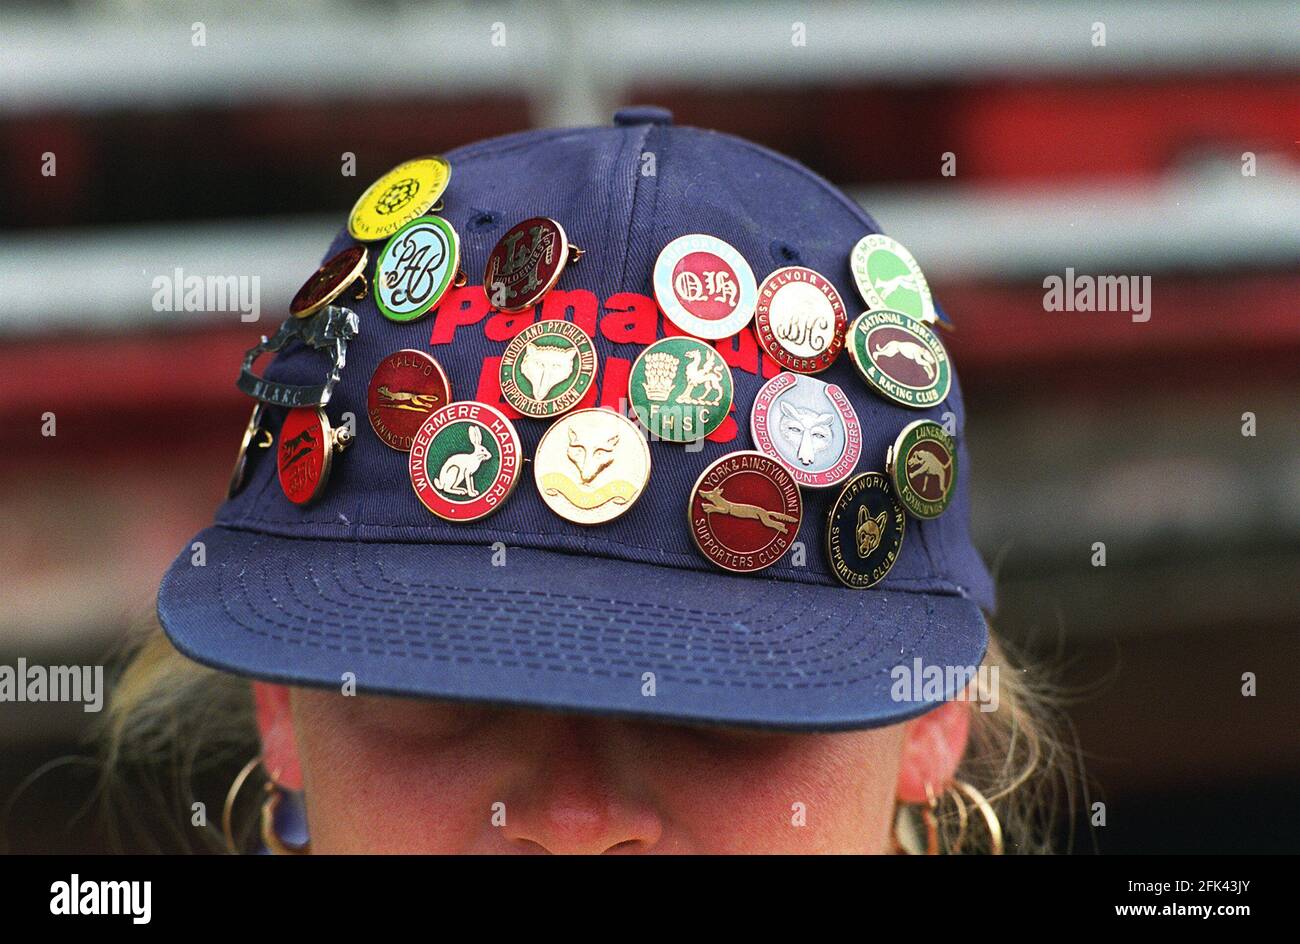 Right to hunt marcher shows an array of badges on the march which crosses through Bedfordshire and Hertfordshire. Stock Photo